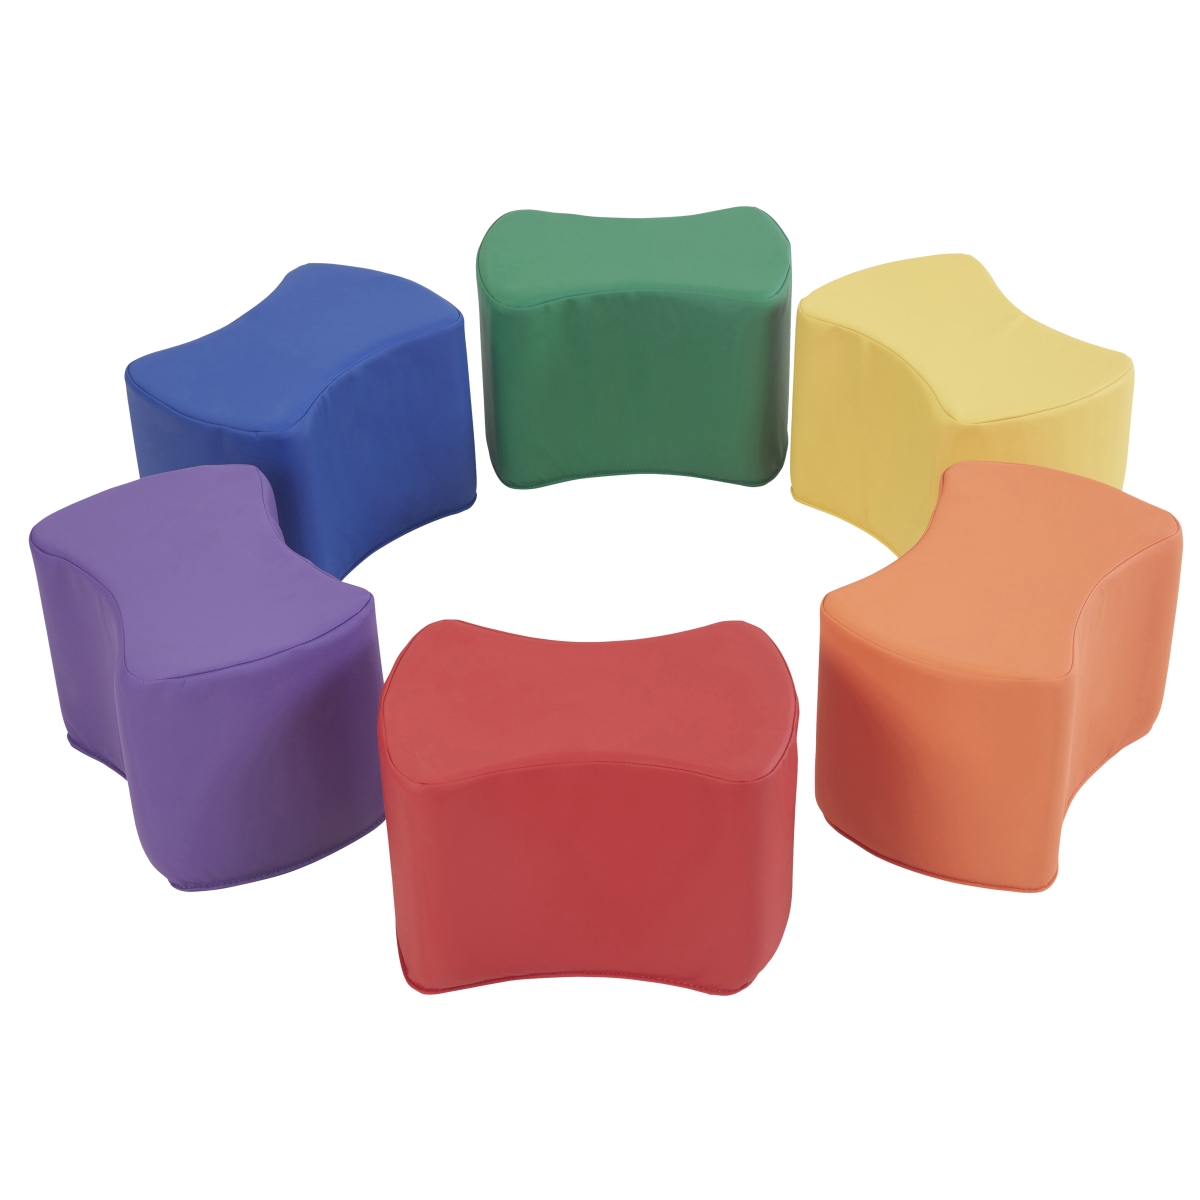 10442-as Butterfly Seating Set, Assorted Color - 6 Piece